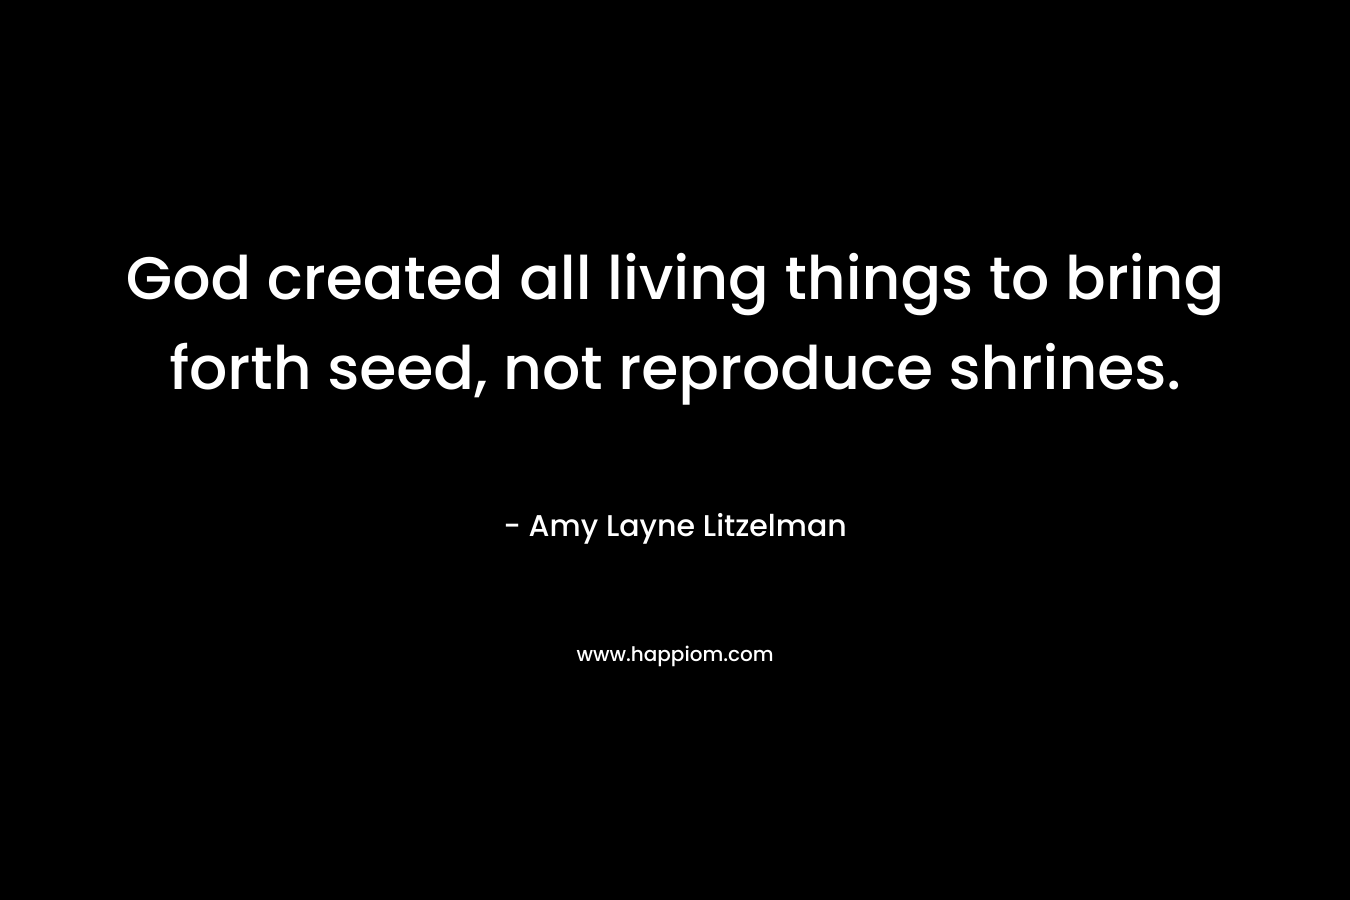 God created all living things to bring forth seed, not reproduce shrines. – Amy Layne Litzelman